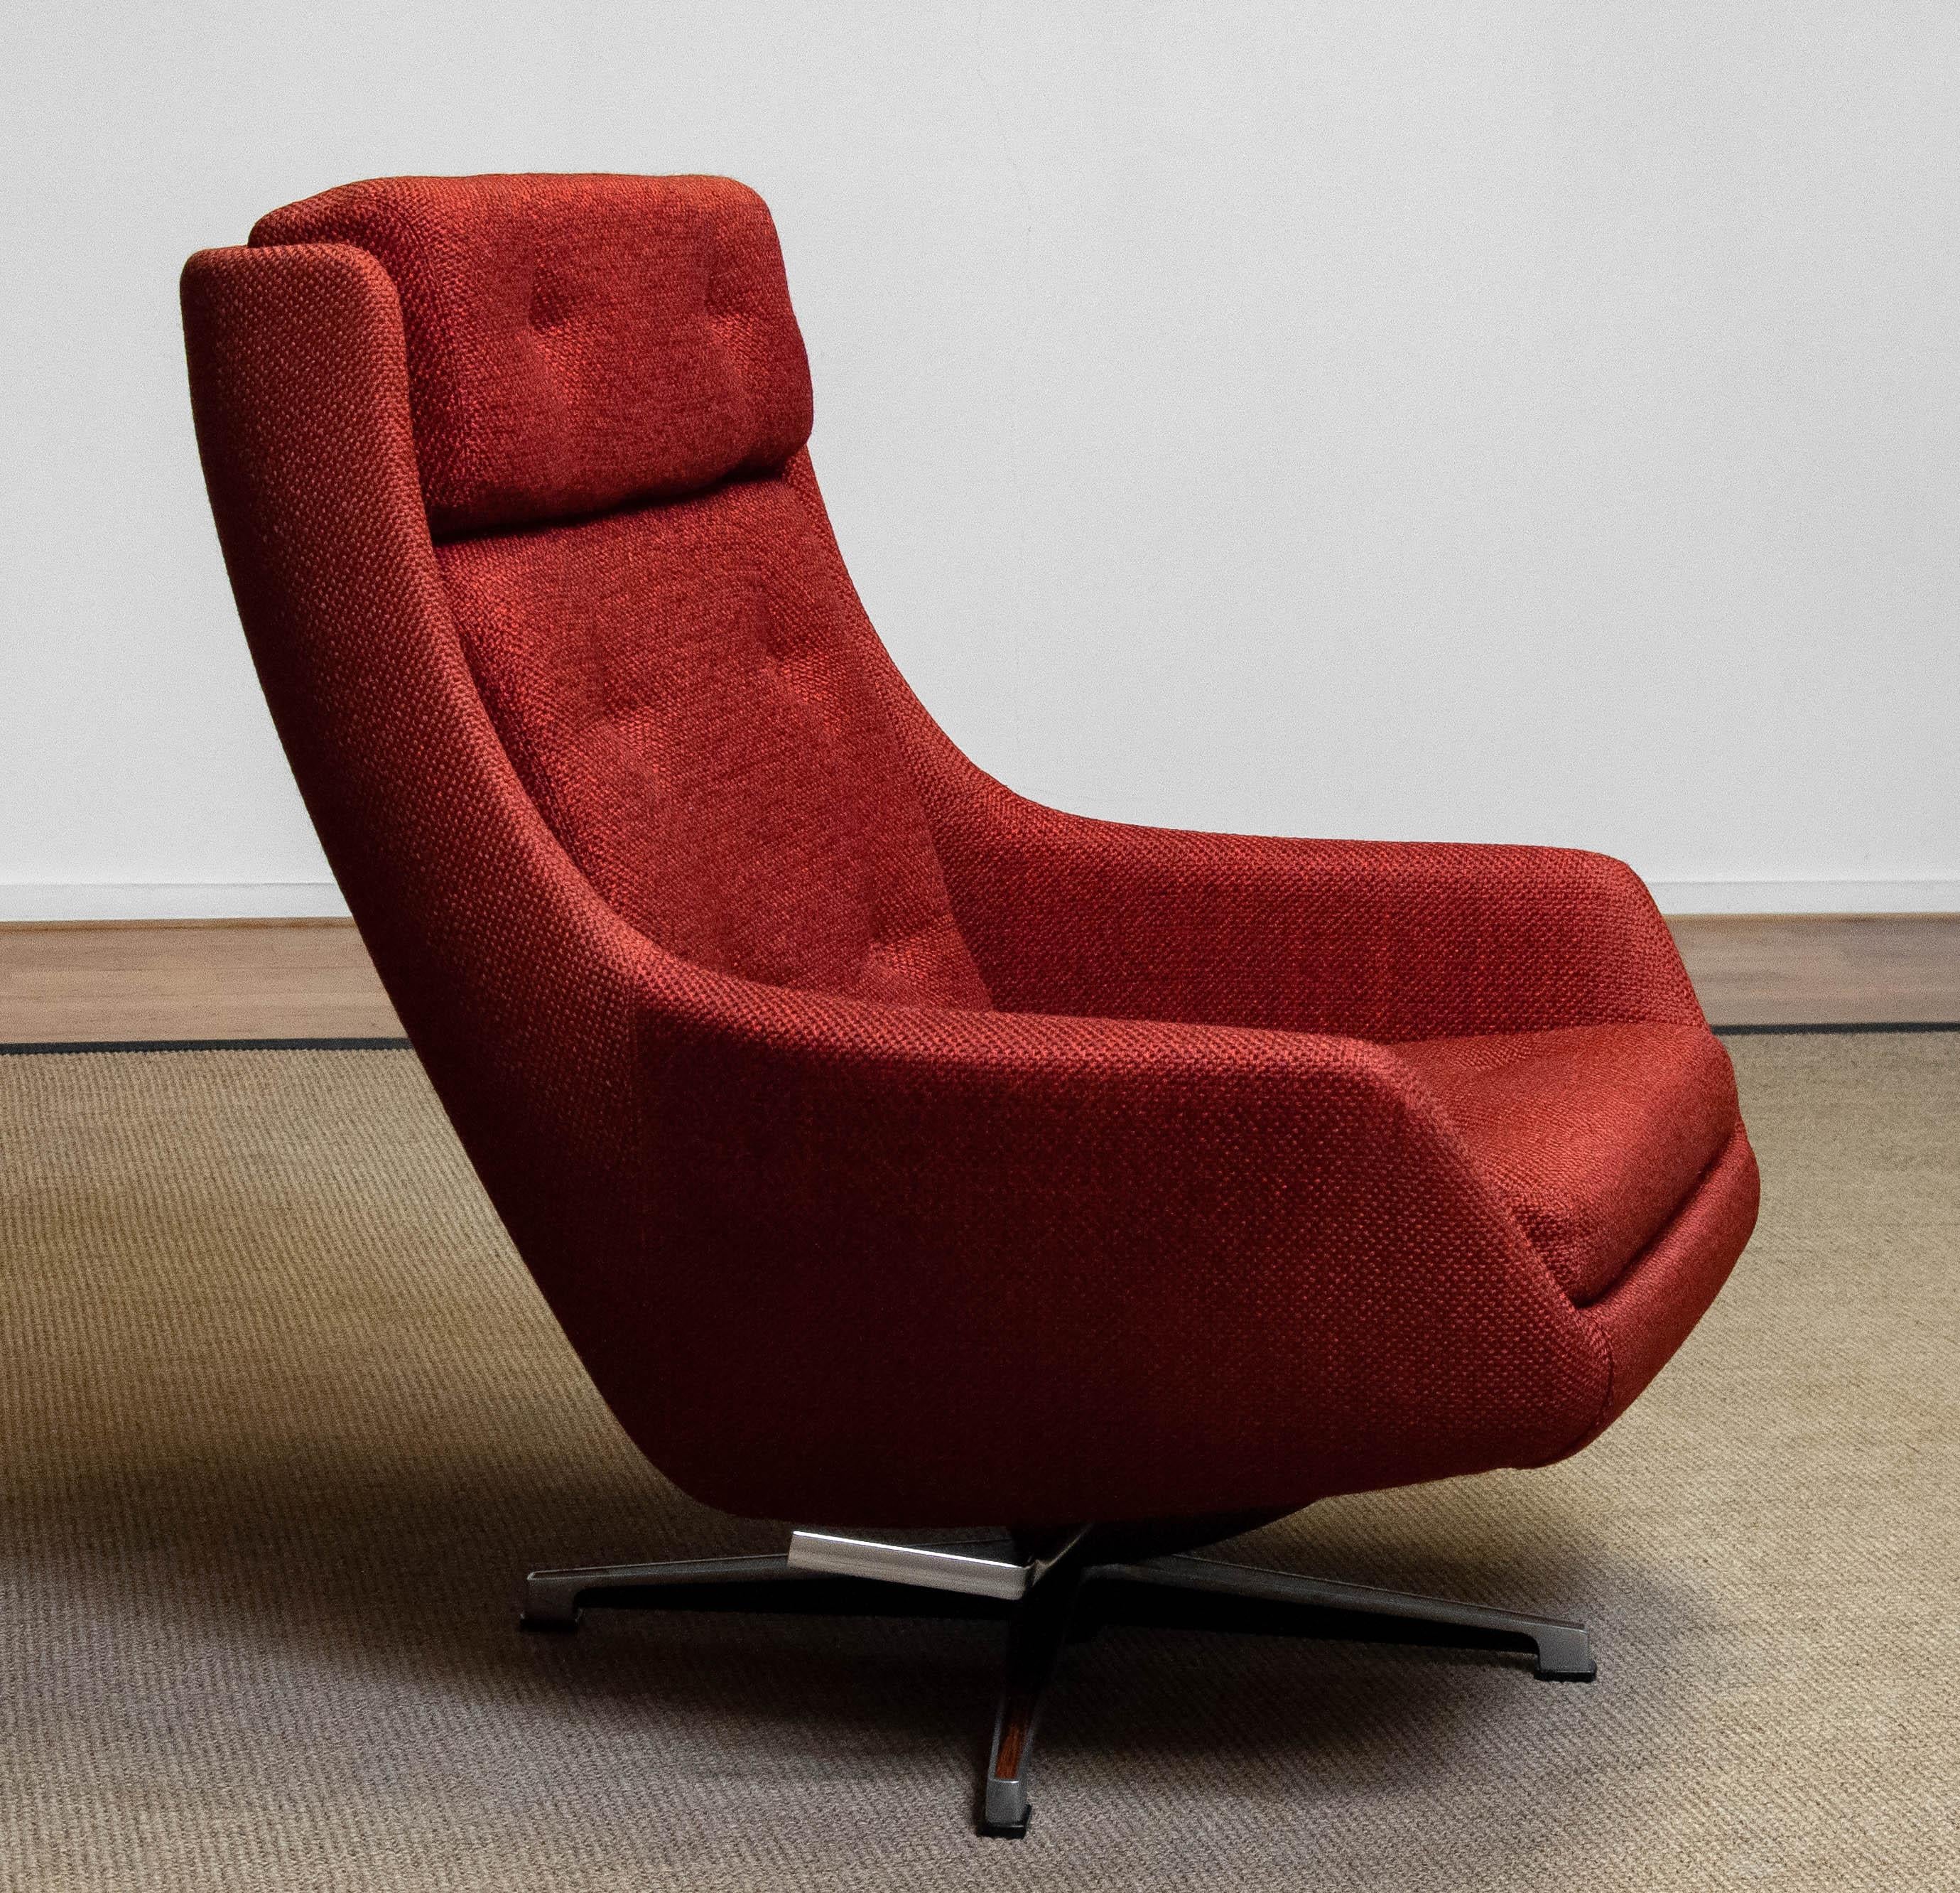 1960s Red Swivel and Rocking Lounge Chair by Alf Svensson for DUX of Sweden 2